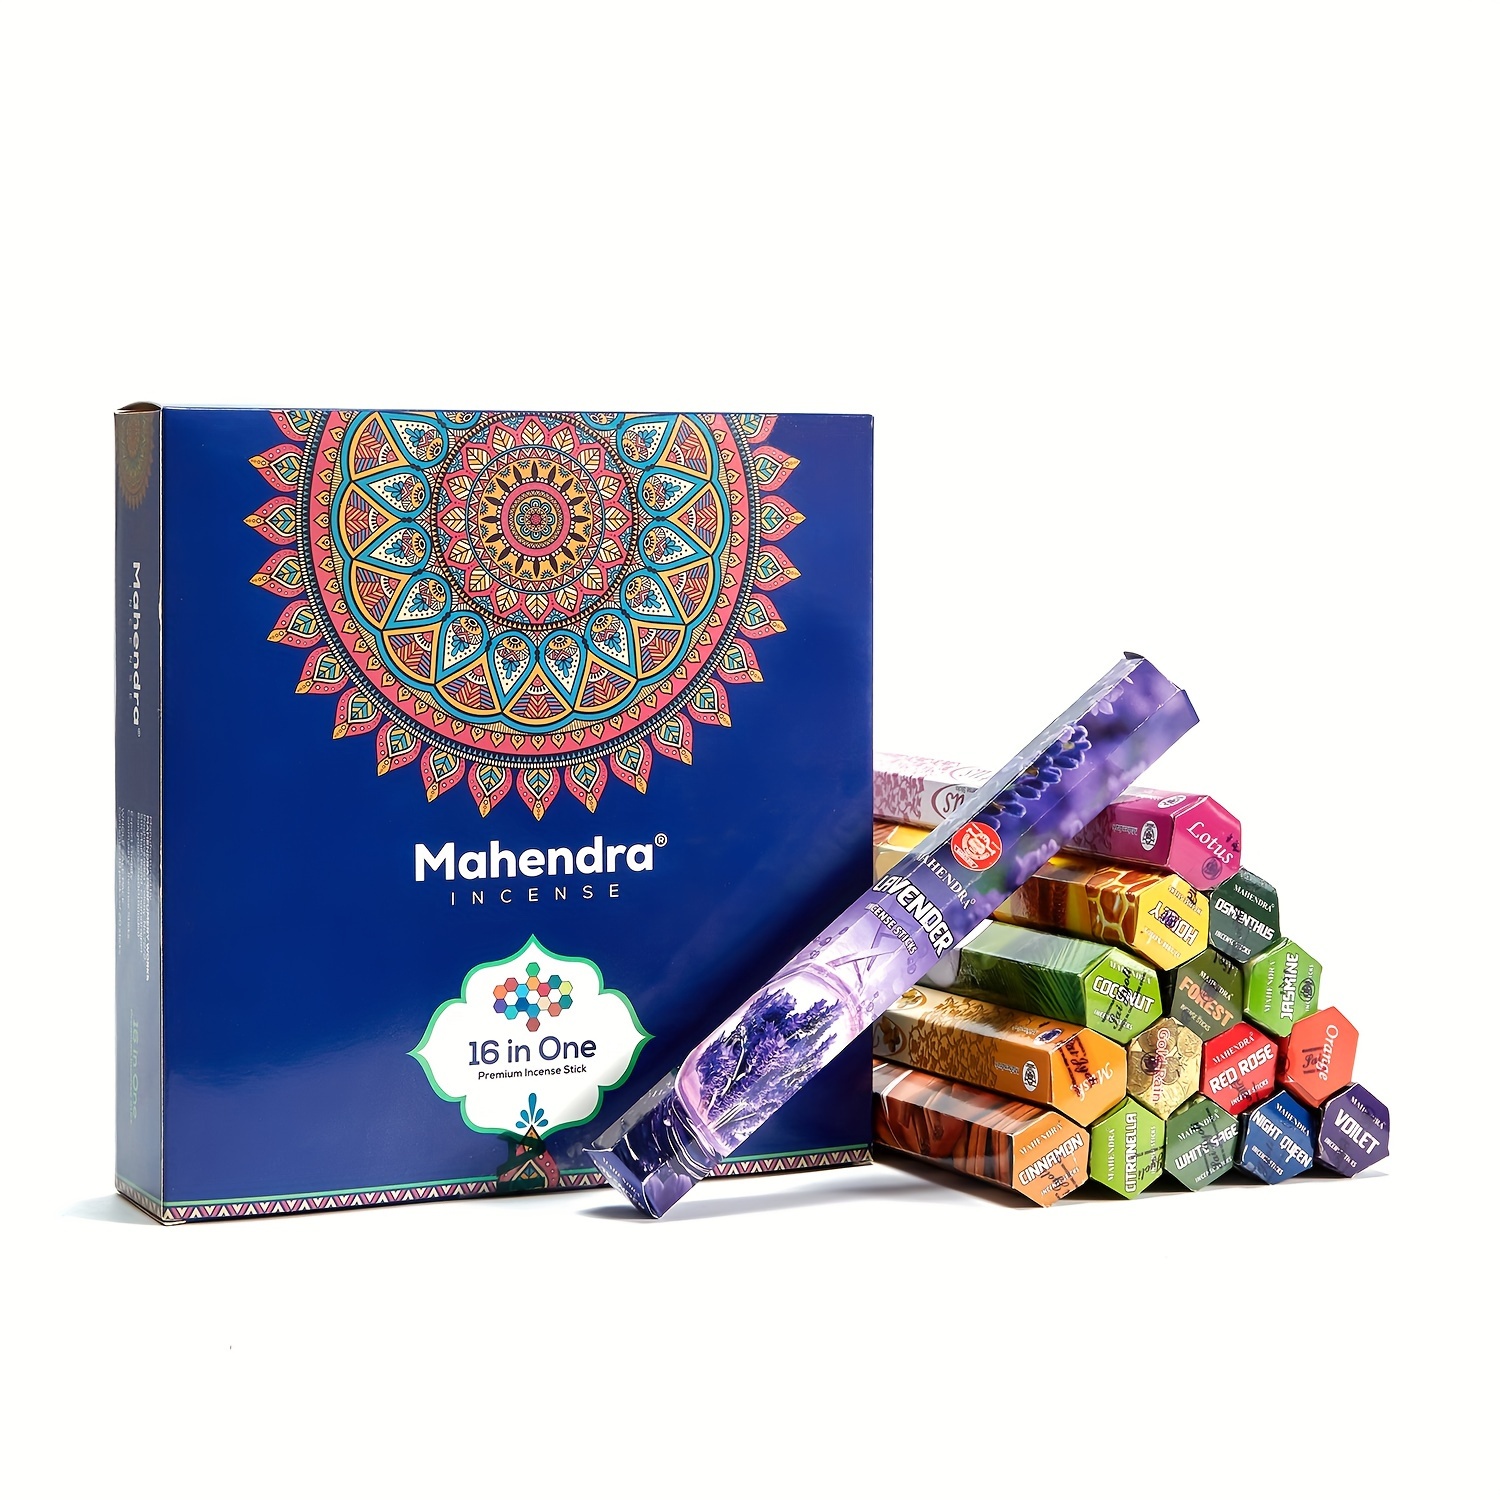 

Mahendra 16 In 1 Incense Sticks: A Collection Of 320 Pieces For Yoga, Meditation, And Home Aroma